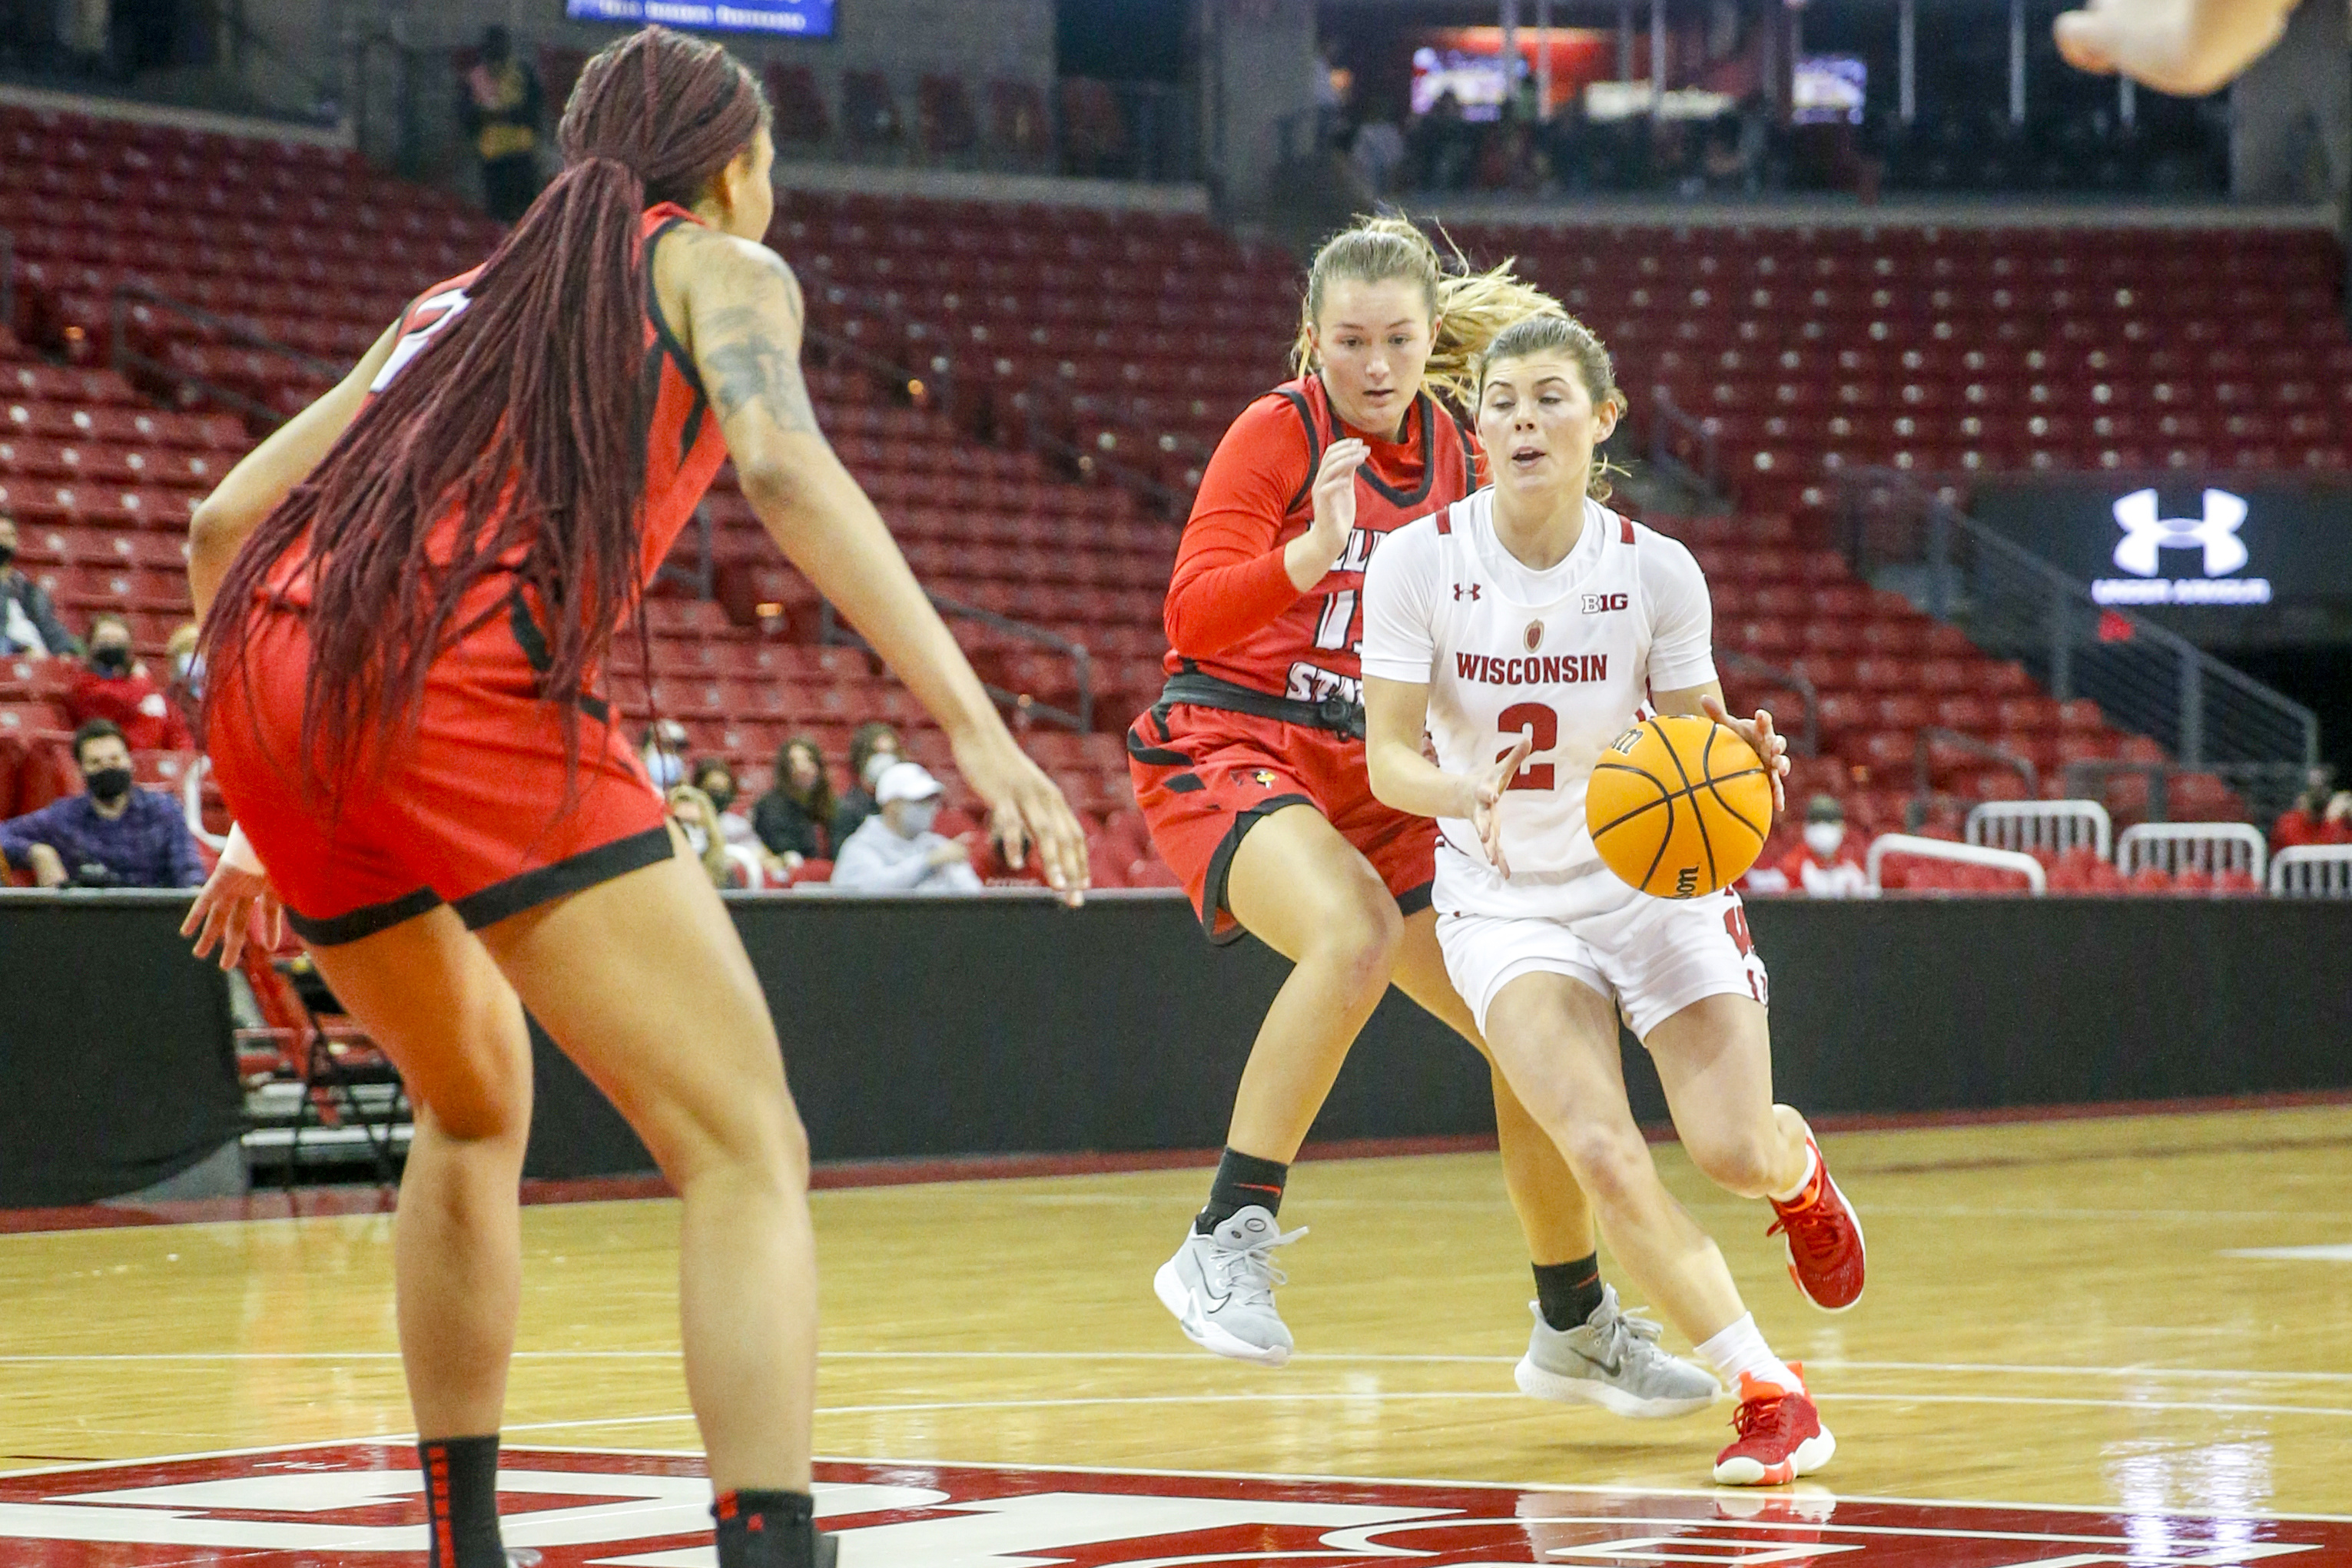 COLLEGE BASKETBALL: DEC 16 Womens - Illinois State at Wisconsin